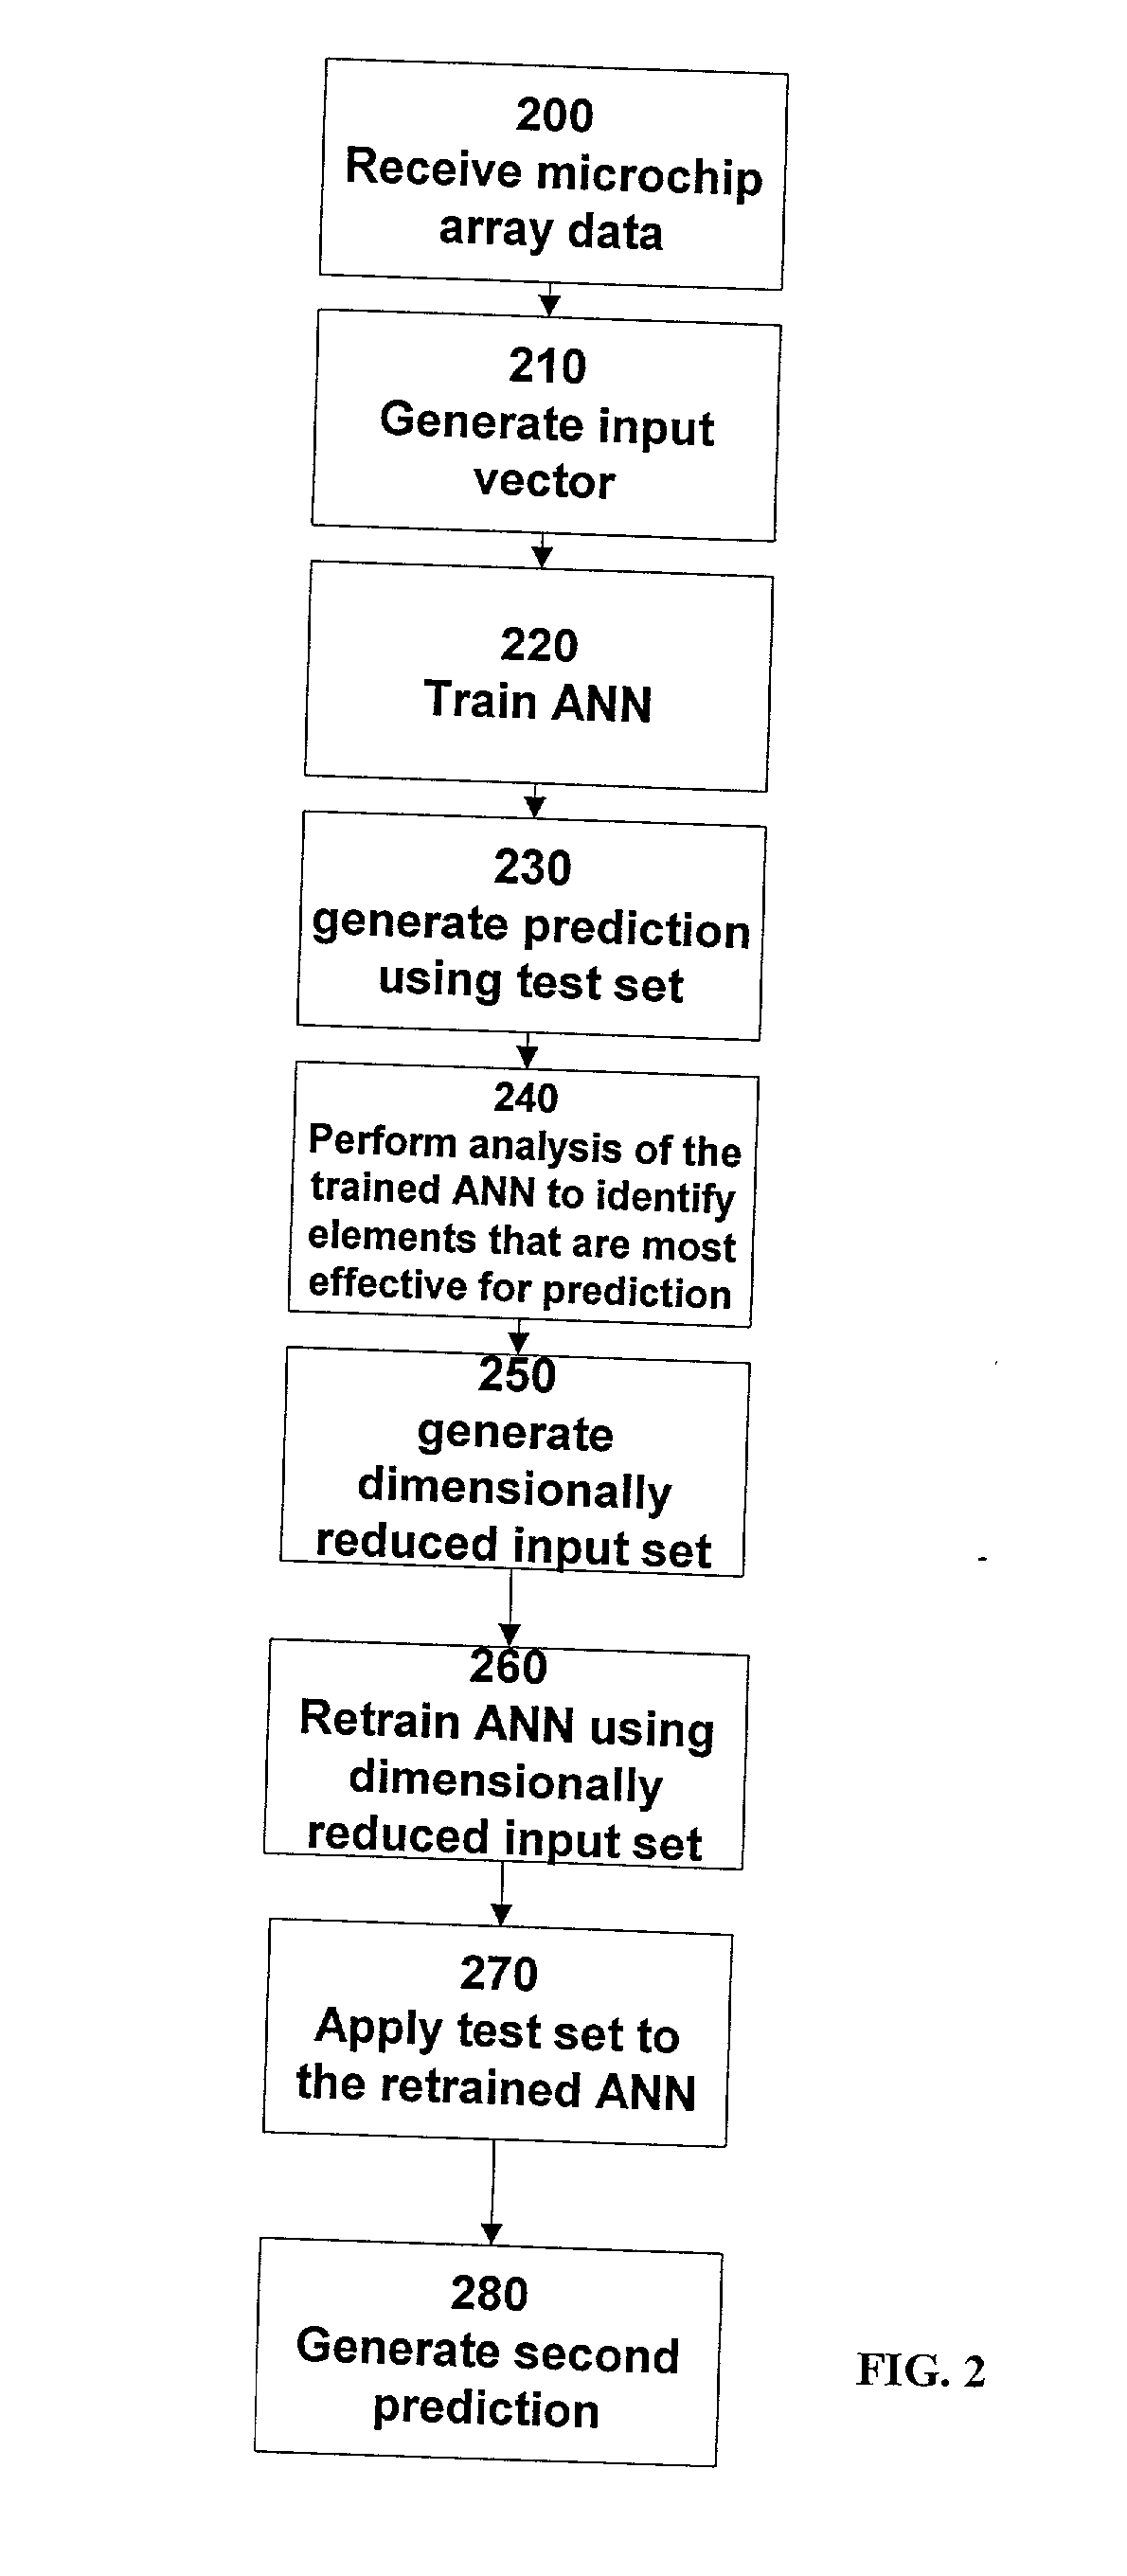 System and method for using neural nets for analyzing micro-arrays